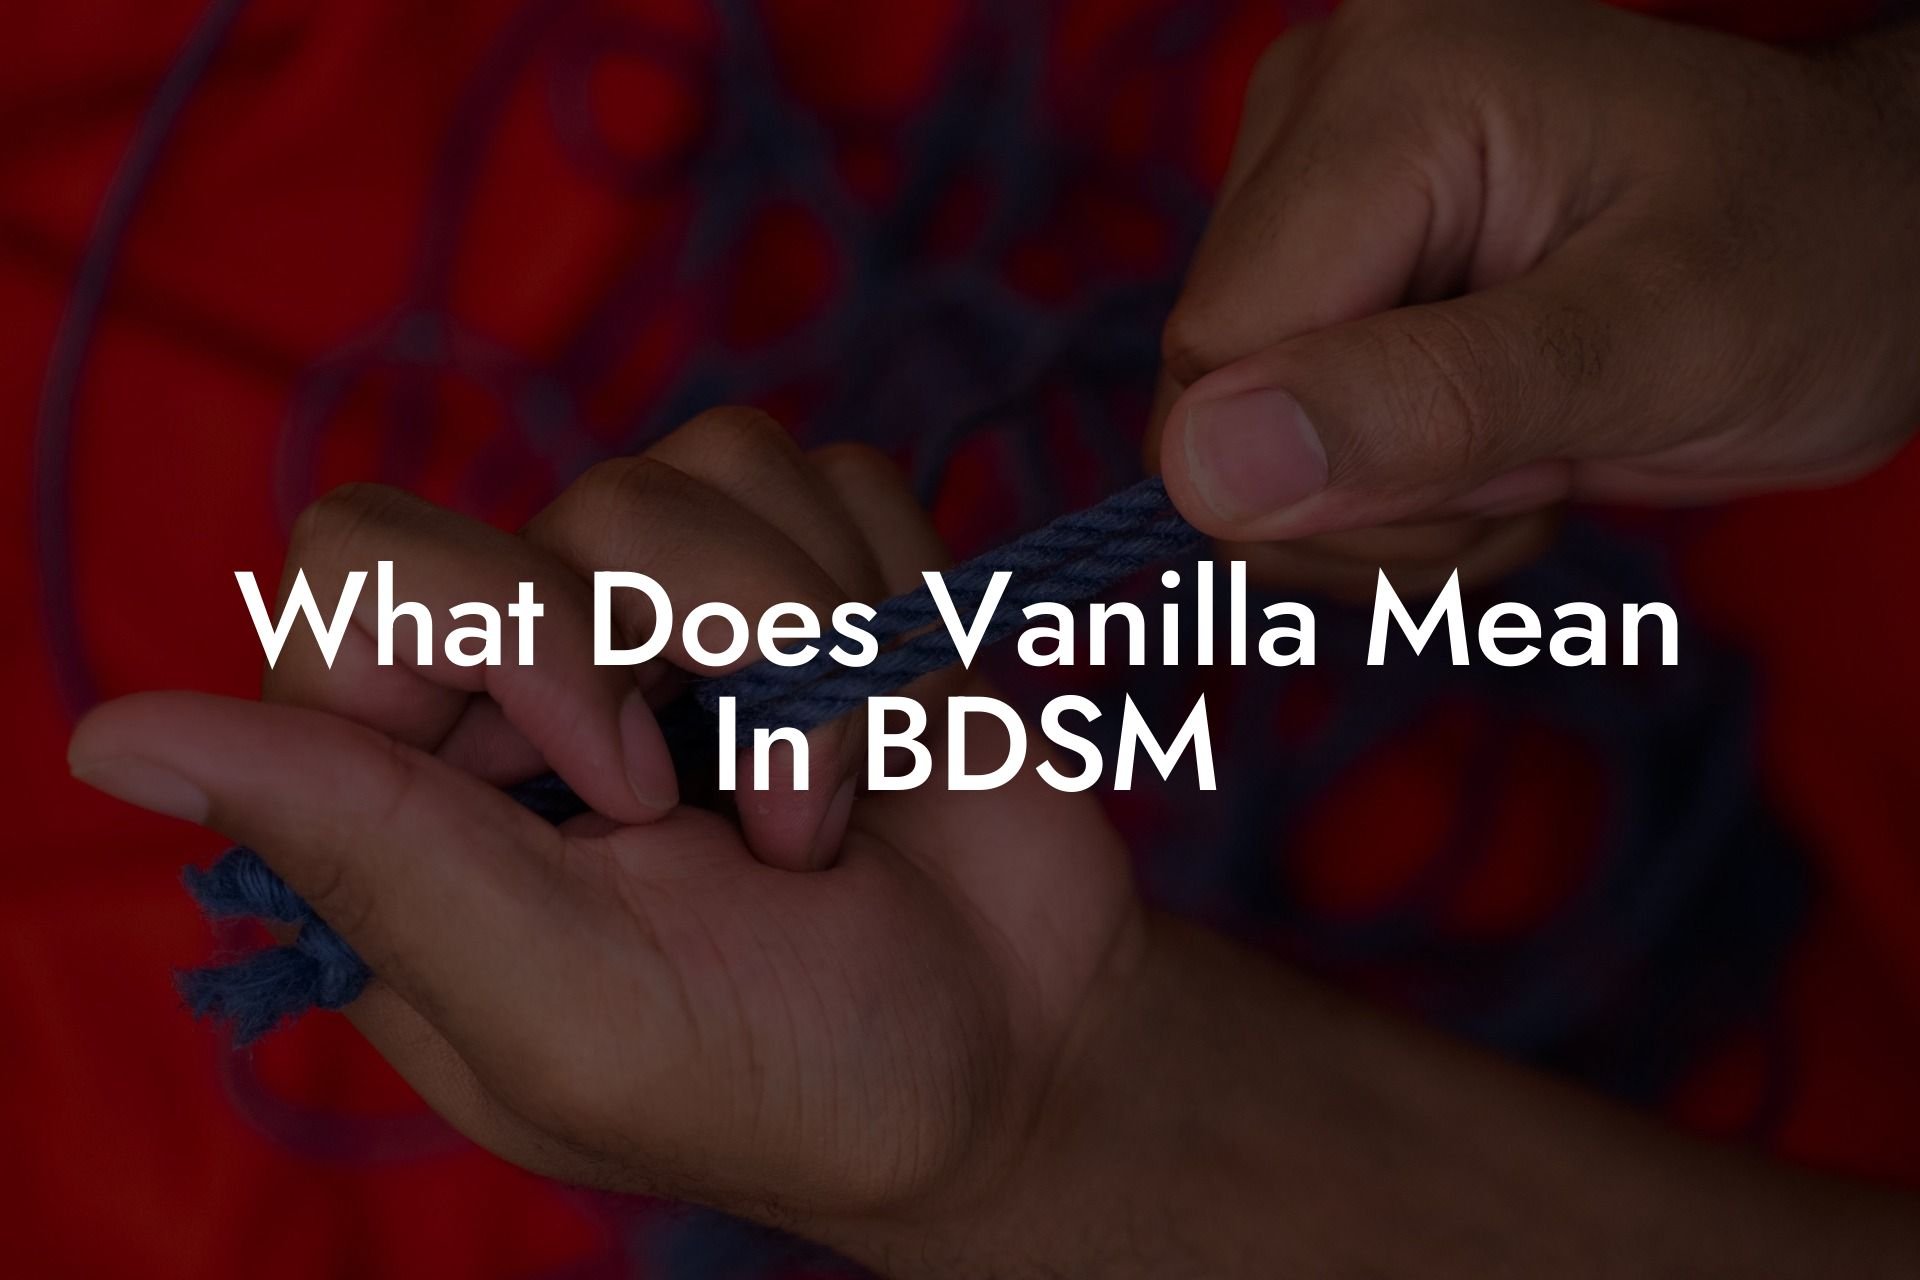 What Does Vanilla Mean In BDSM